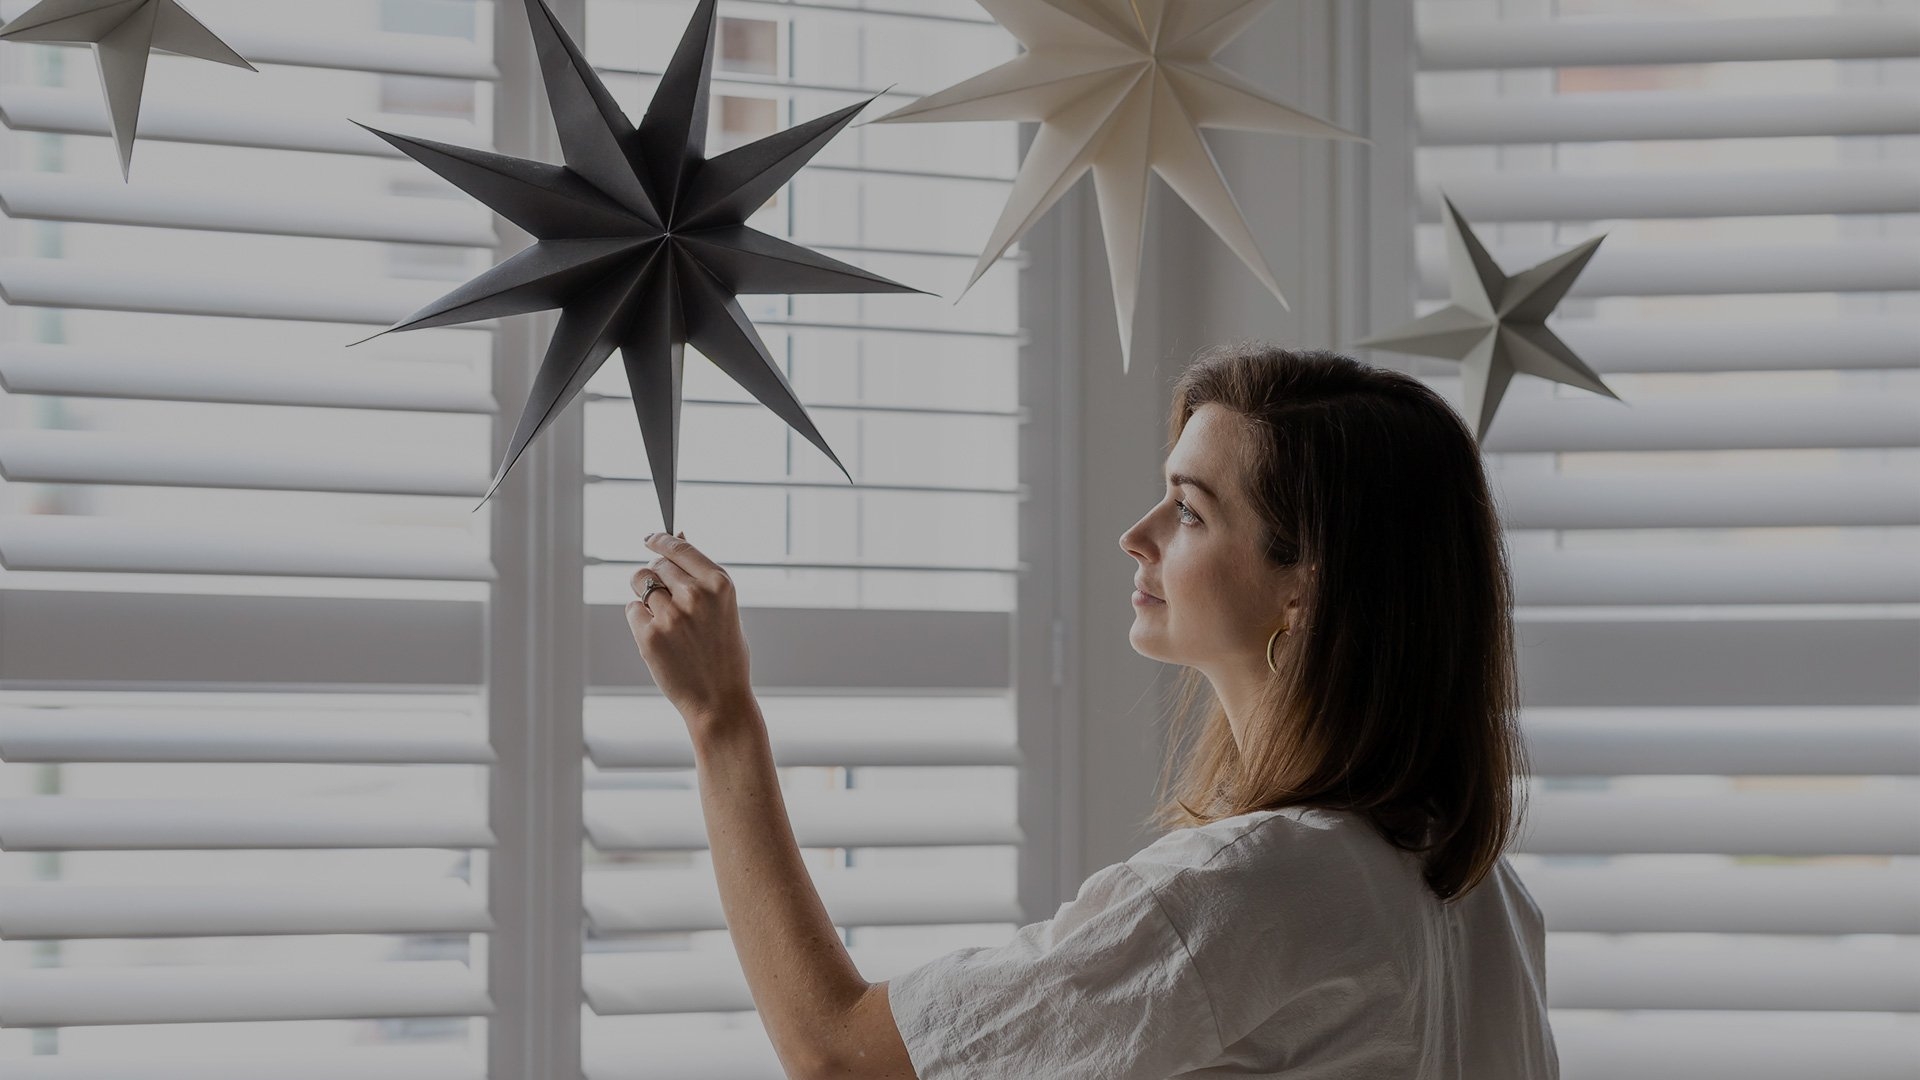 A woman touches a paper star hanging from her ceiling, in front of shuttered windows.